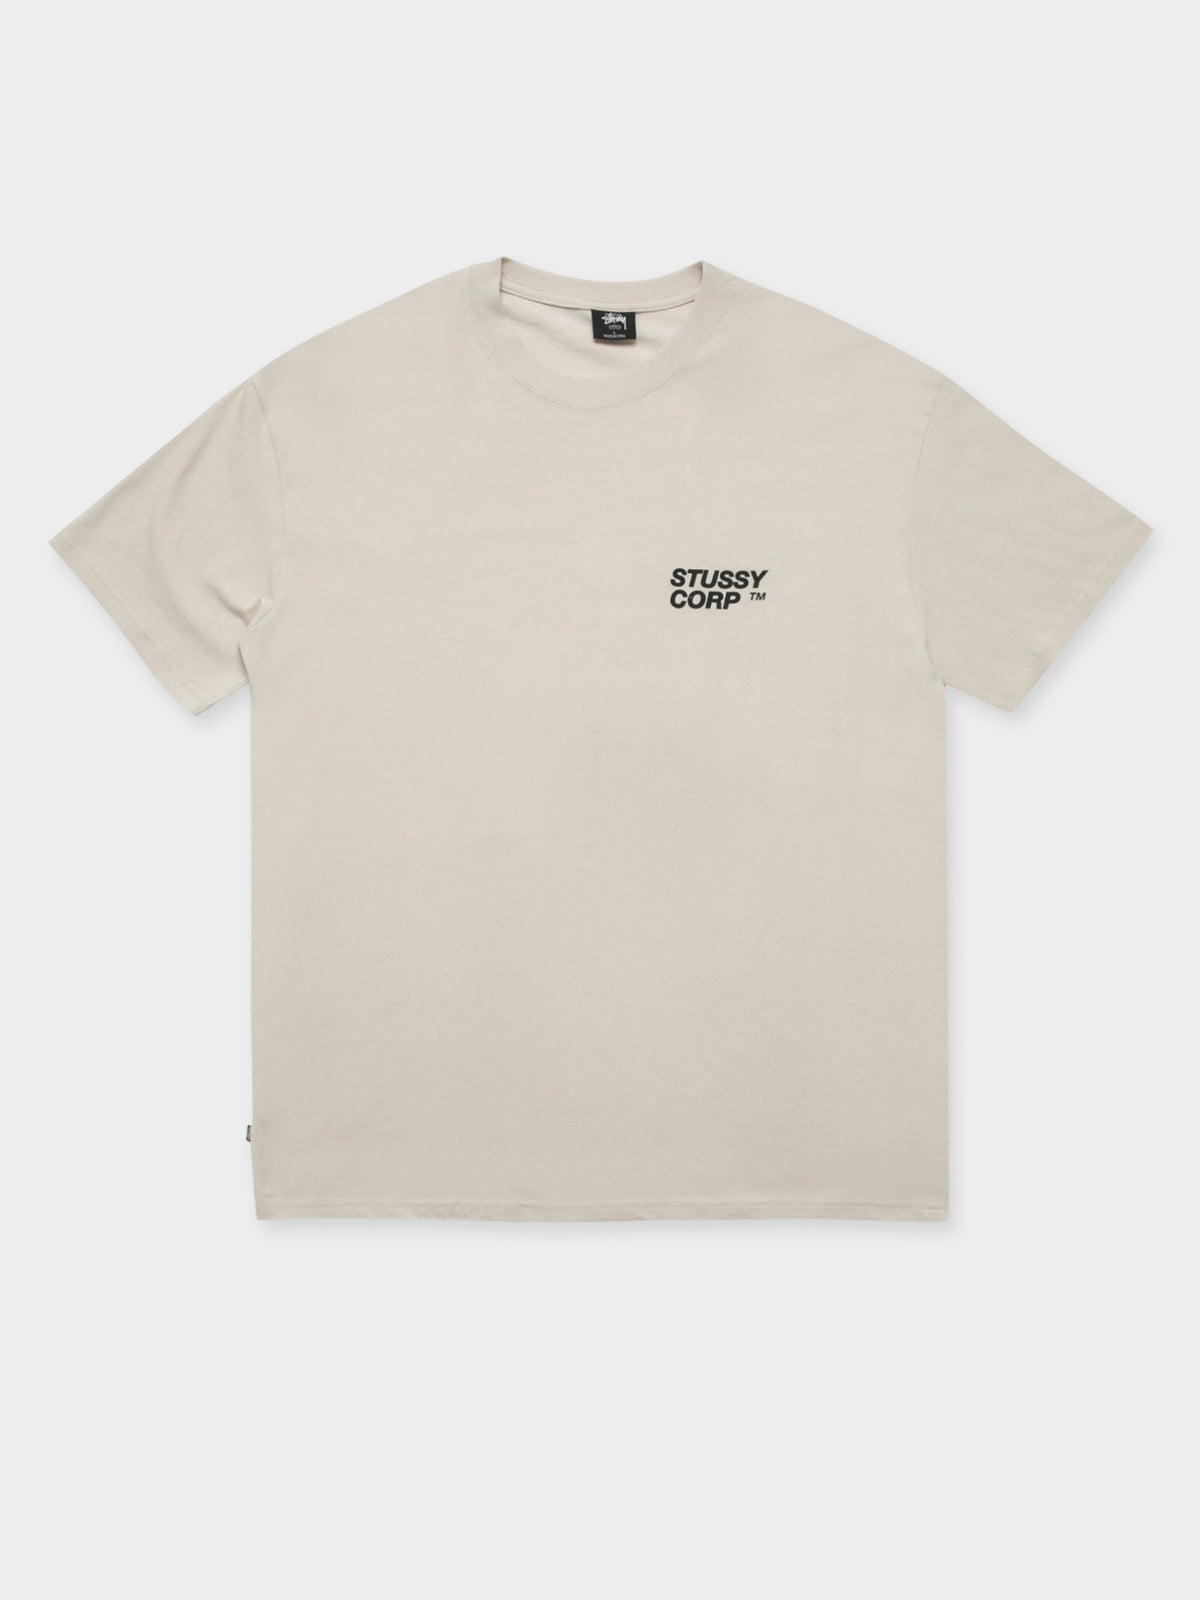 Corp Short Sleeve T-Shirt in White Sand